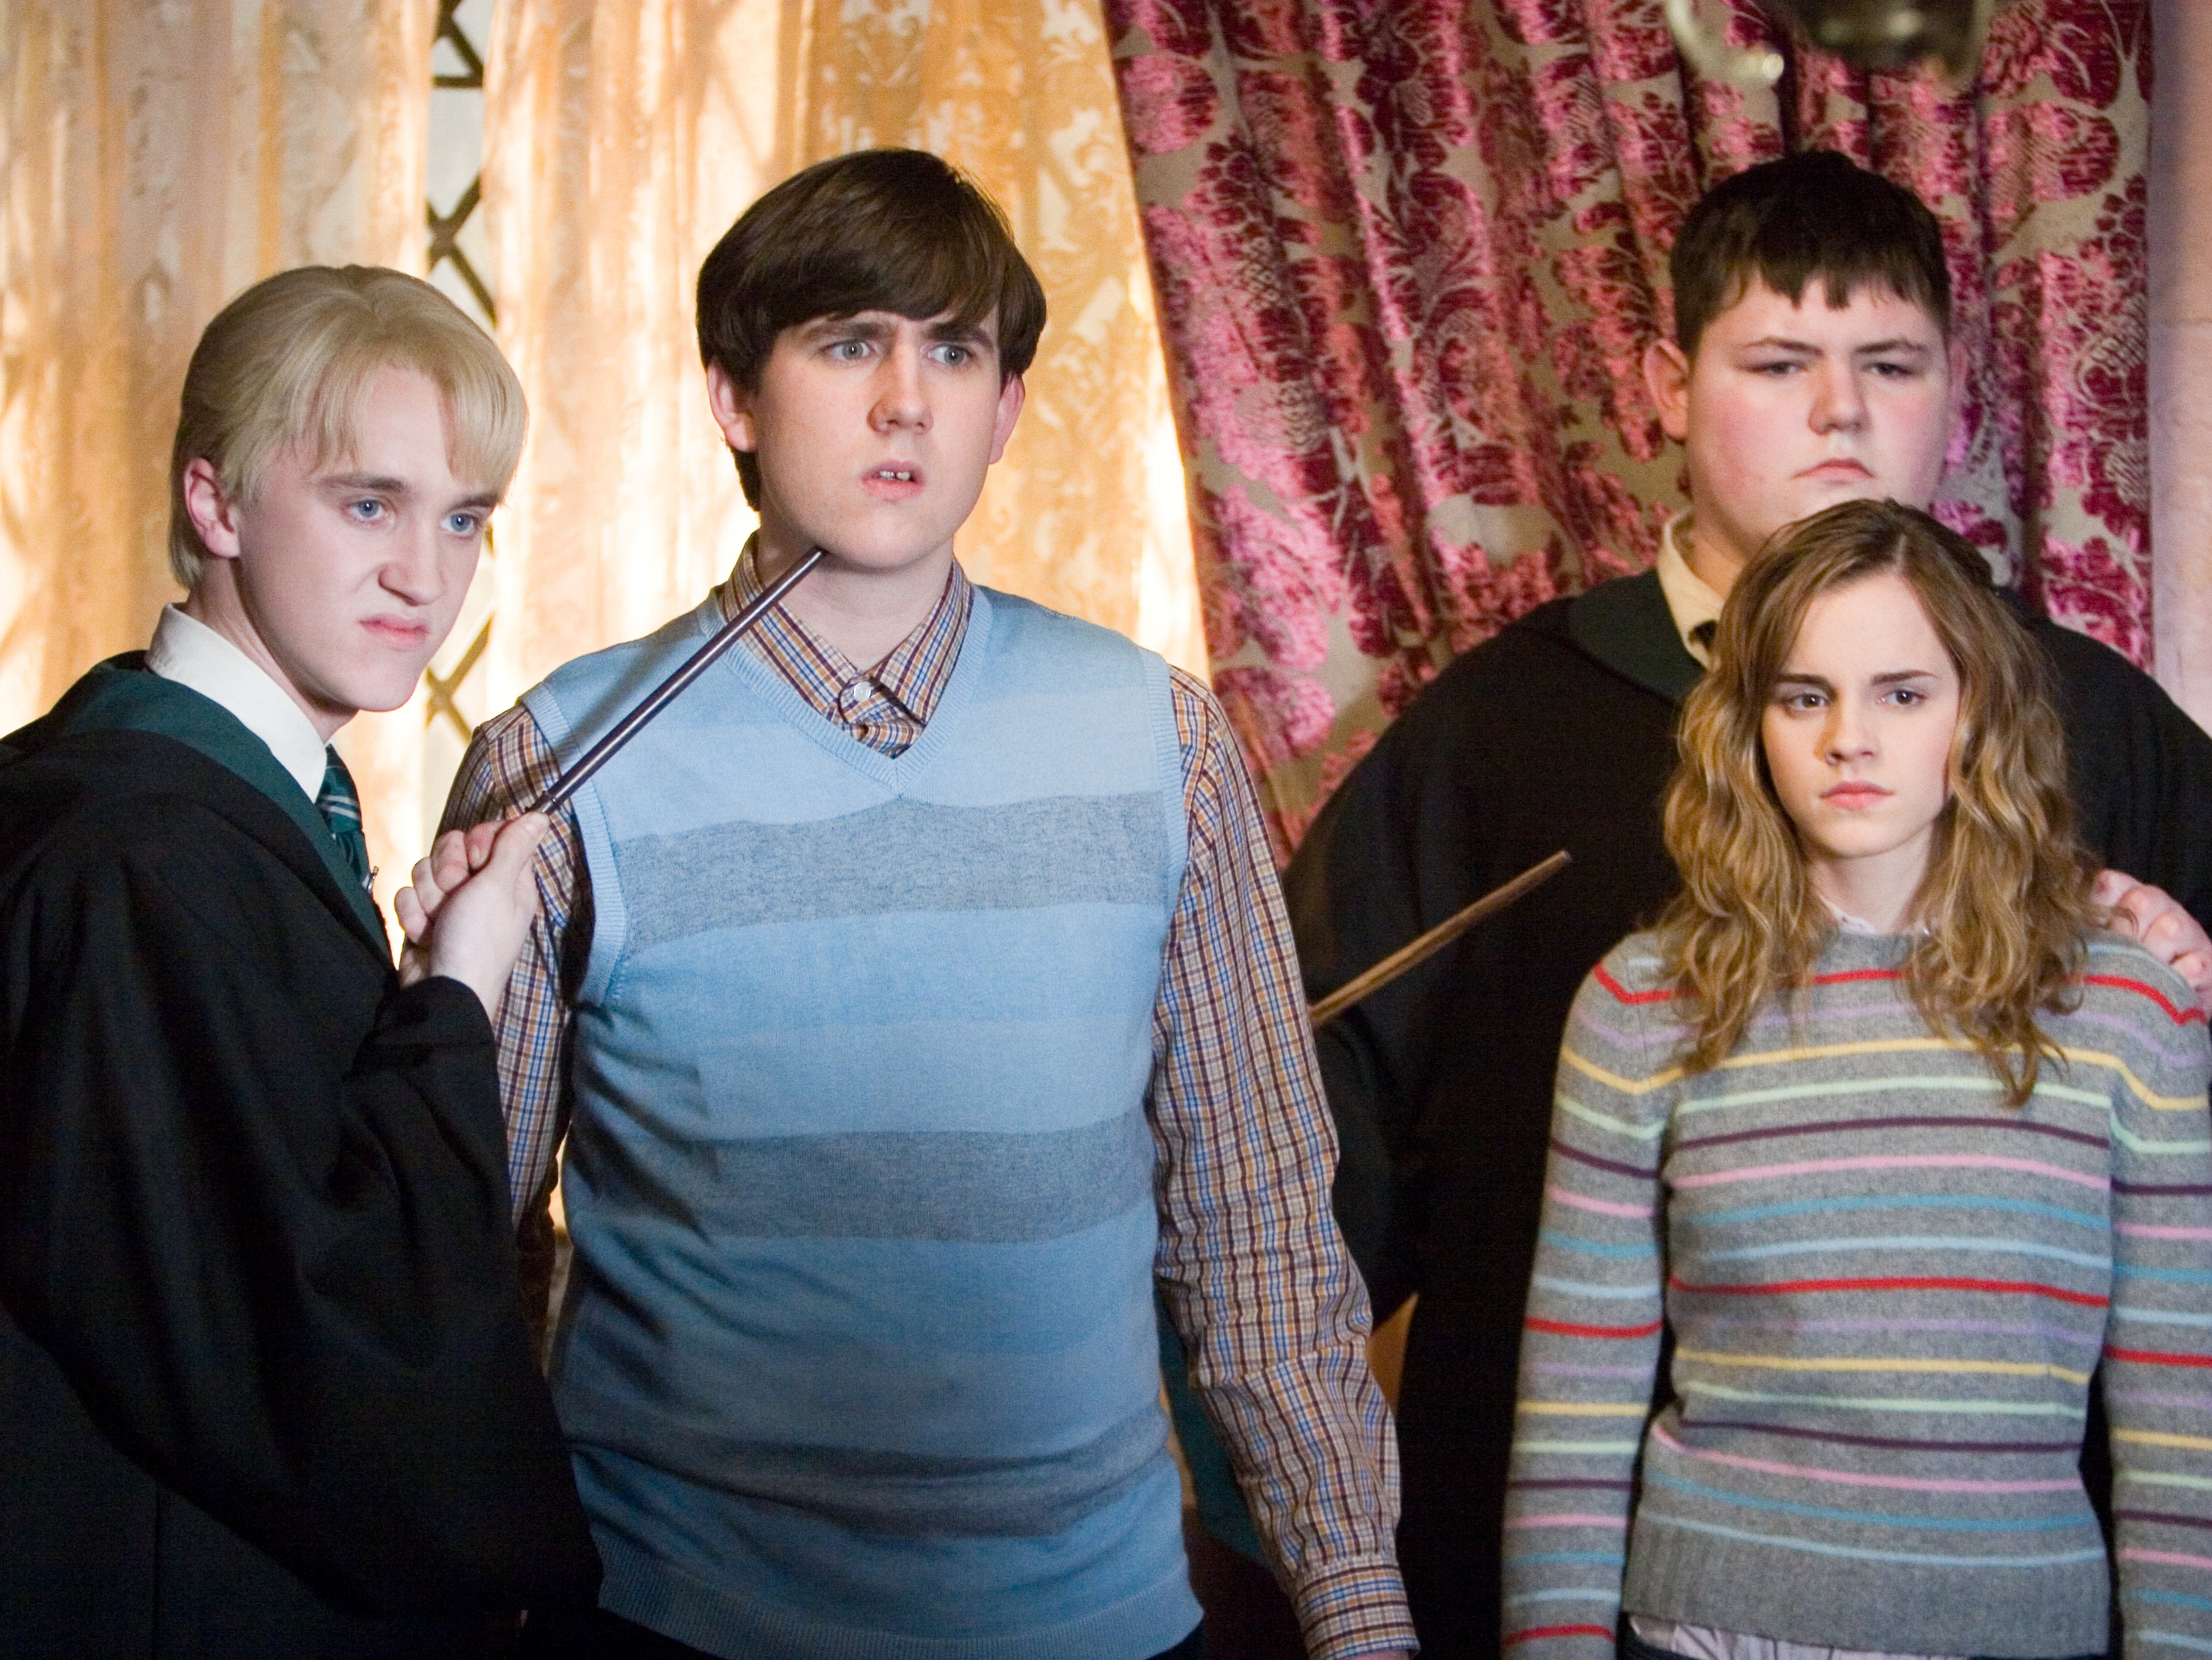 Matthew Lewis (second from left) played the bumbling Neville Longbottom in the Harry Potter film franchise